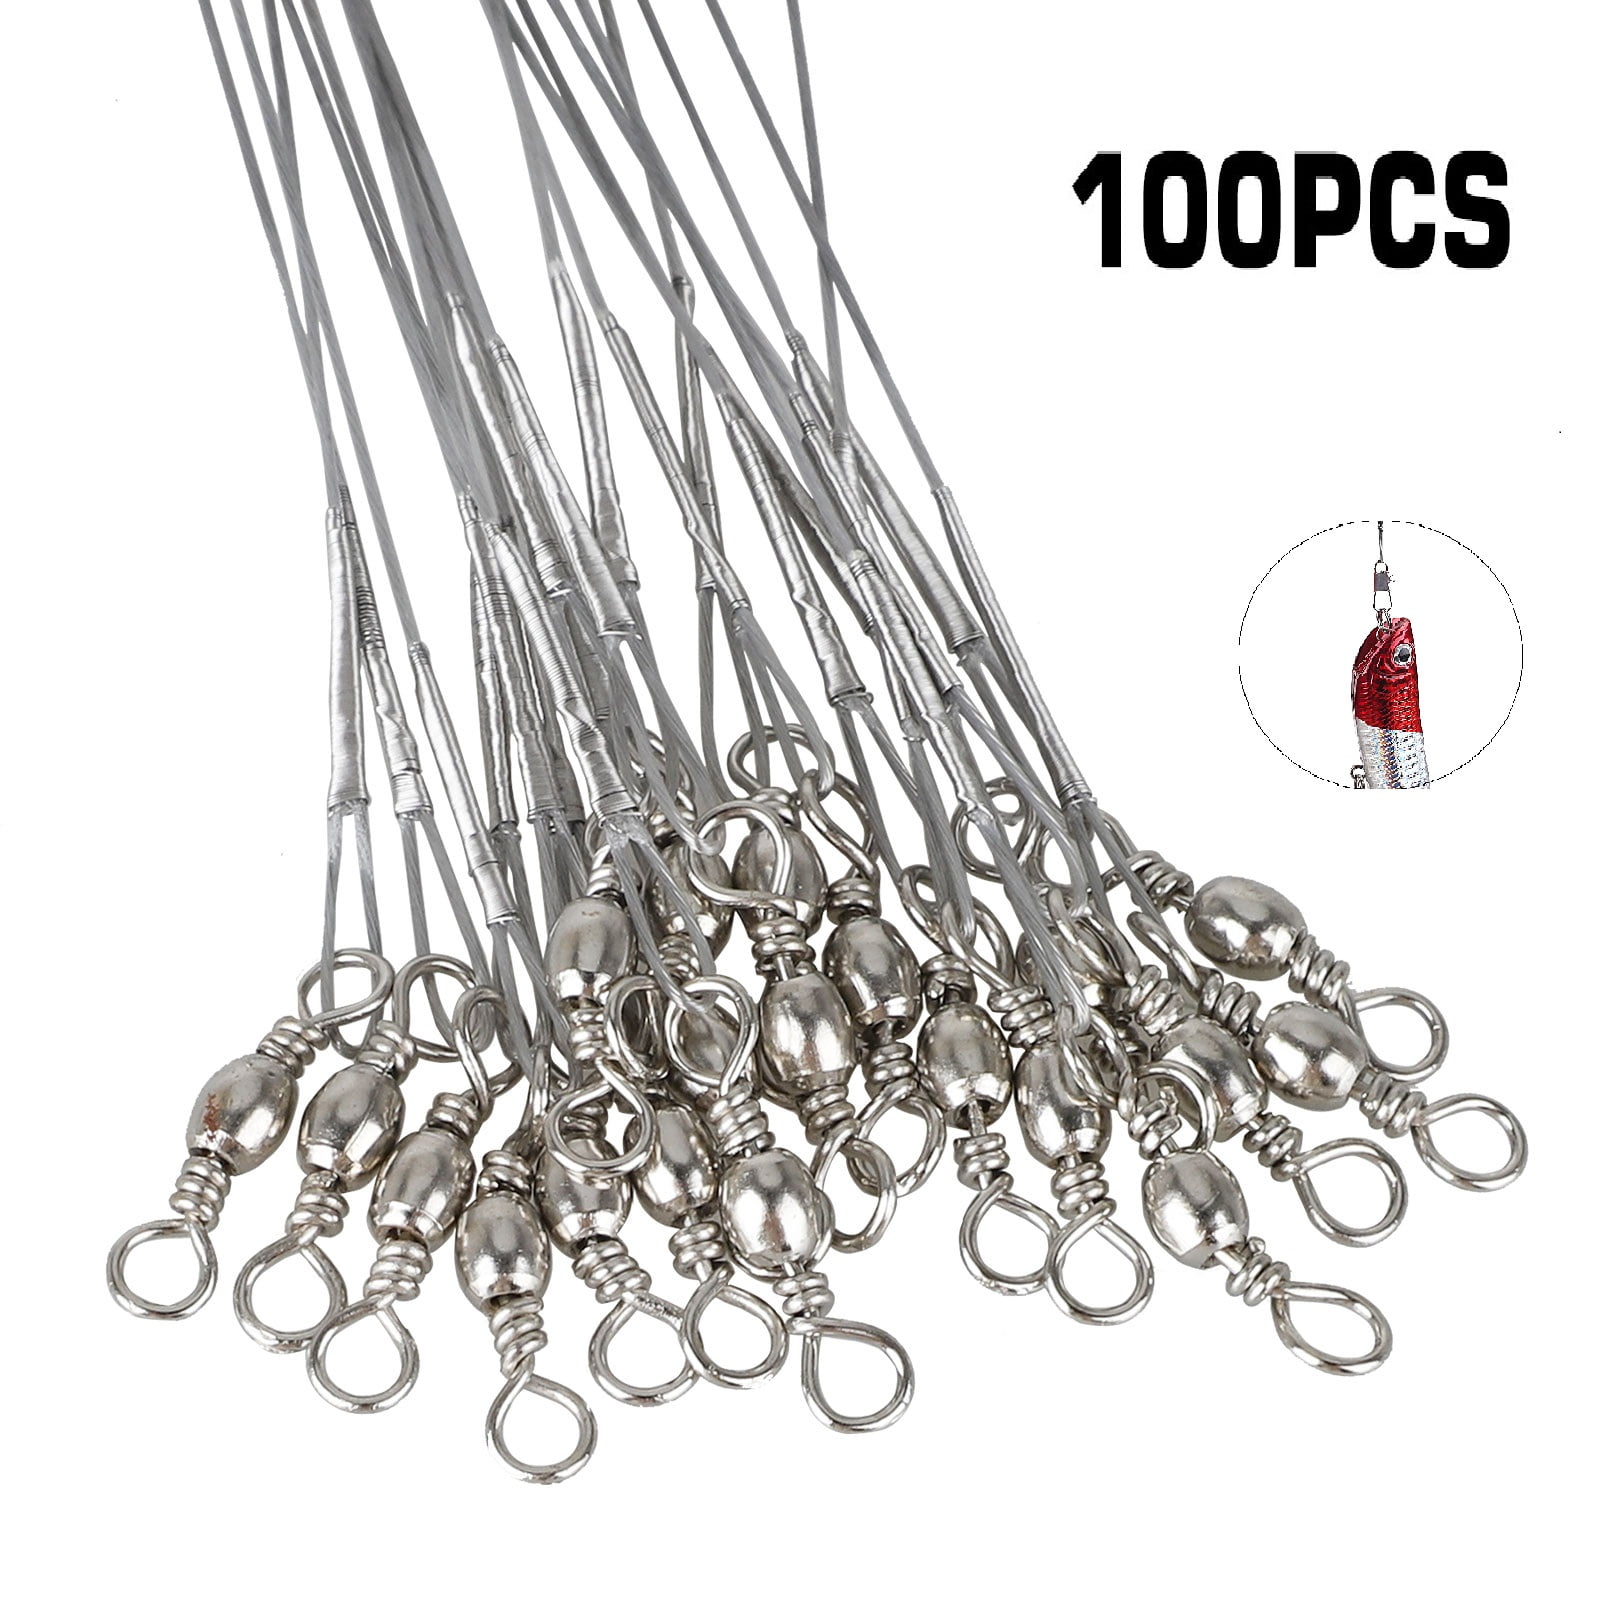 KE_ 10Pcs Stainless Steel Fishing Wire Leader Wire Tackle Tool with Snap&Swi Details about   IC 